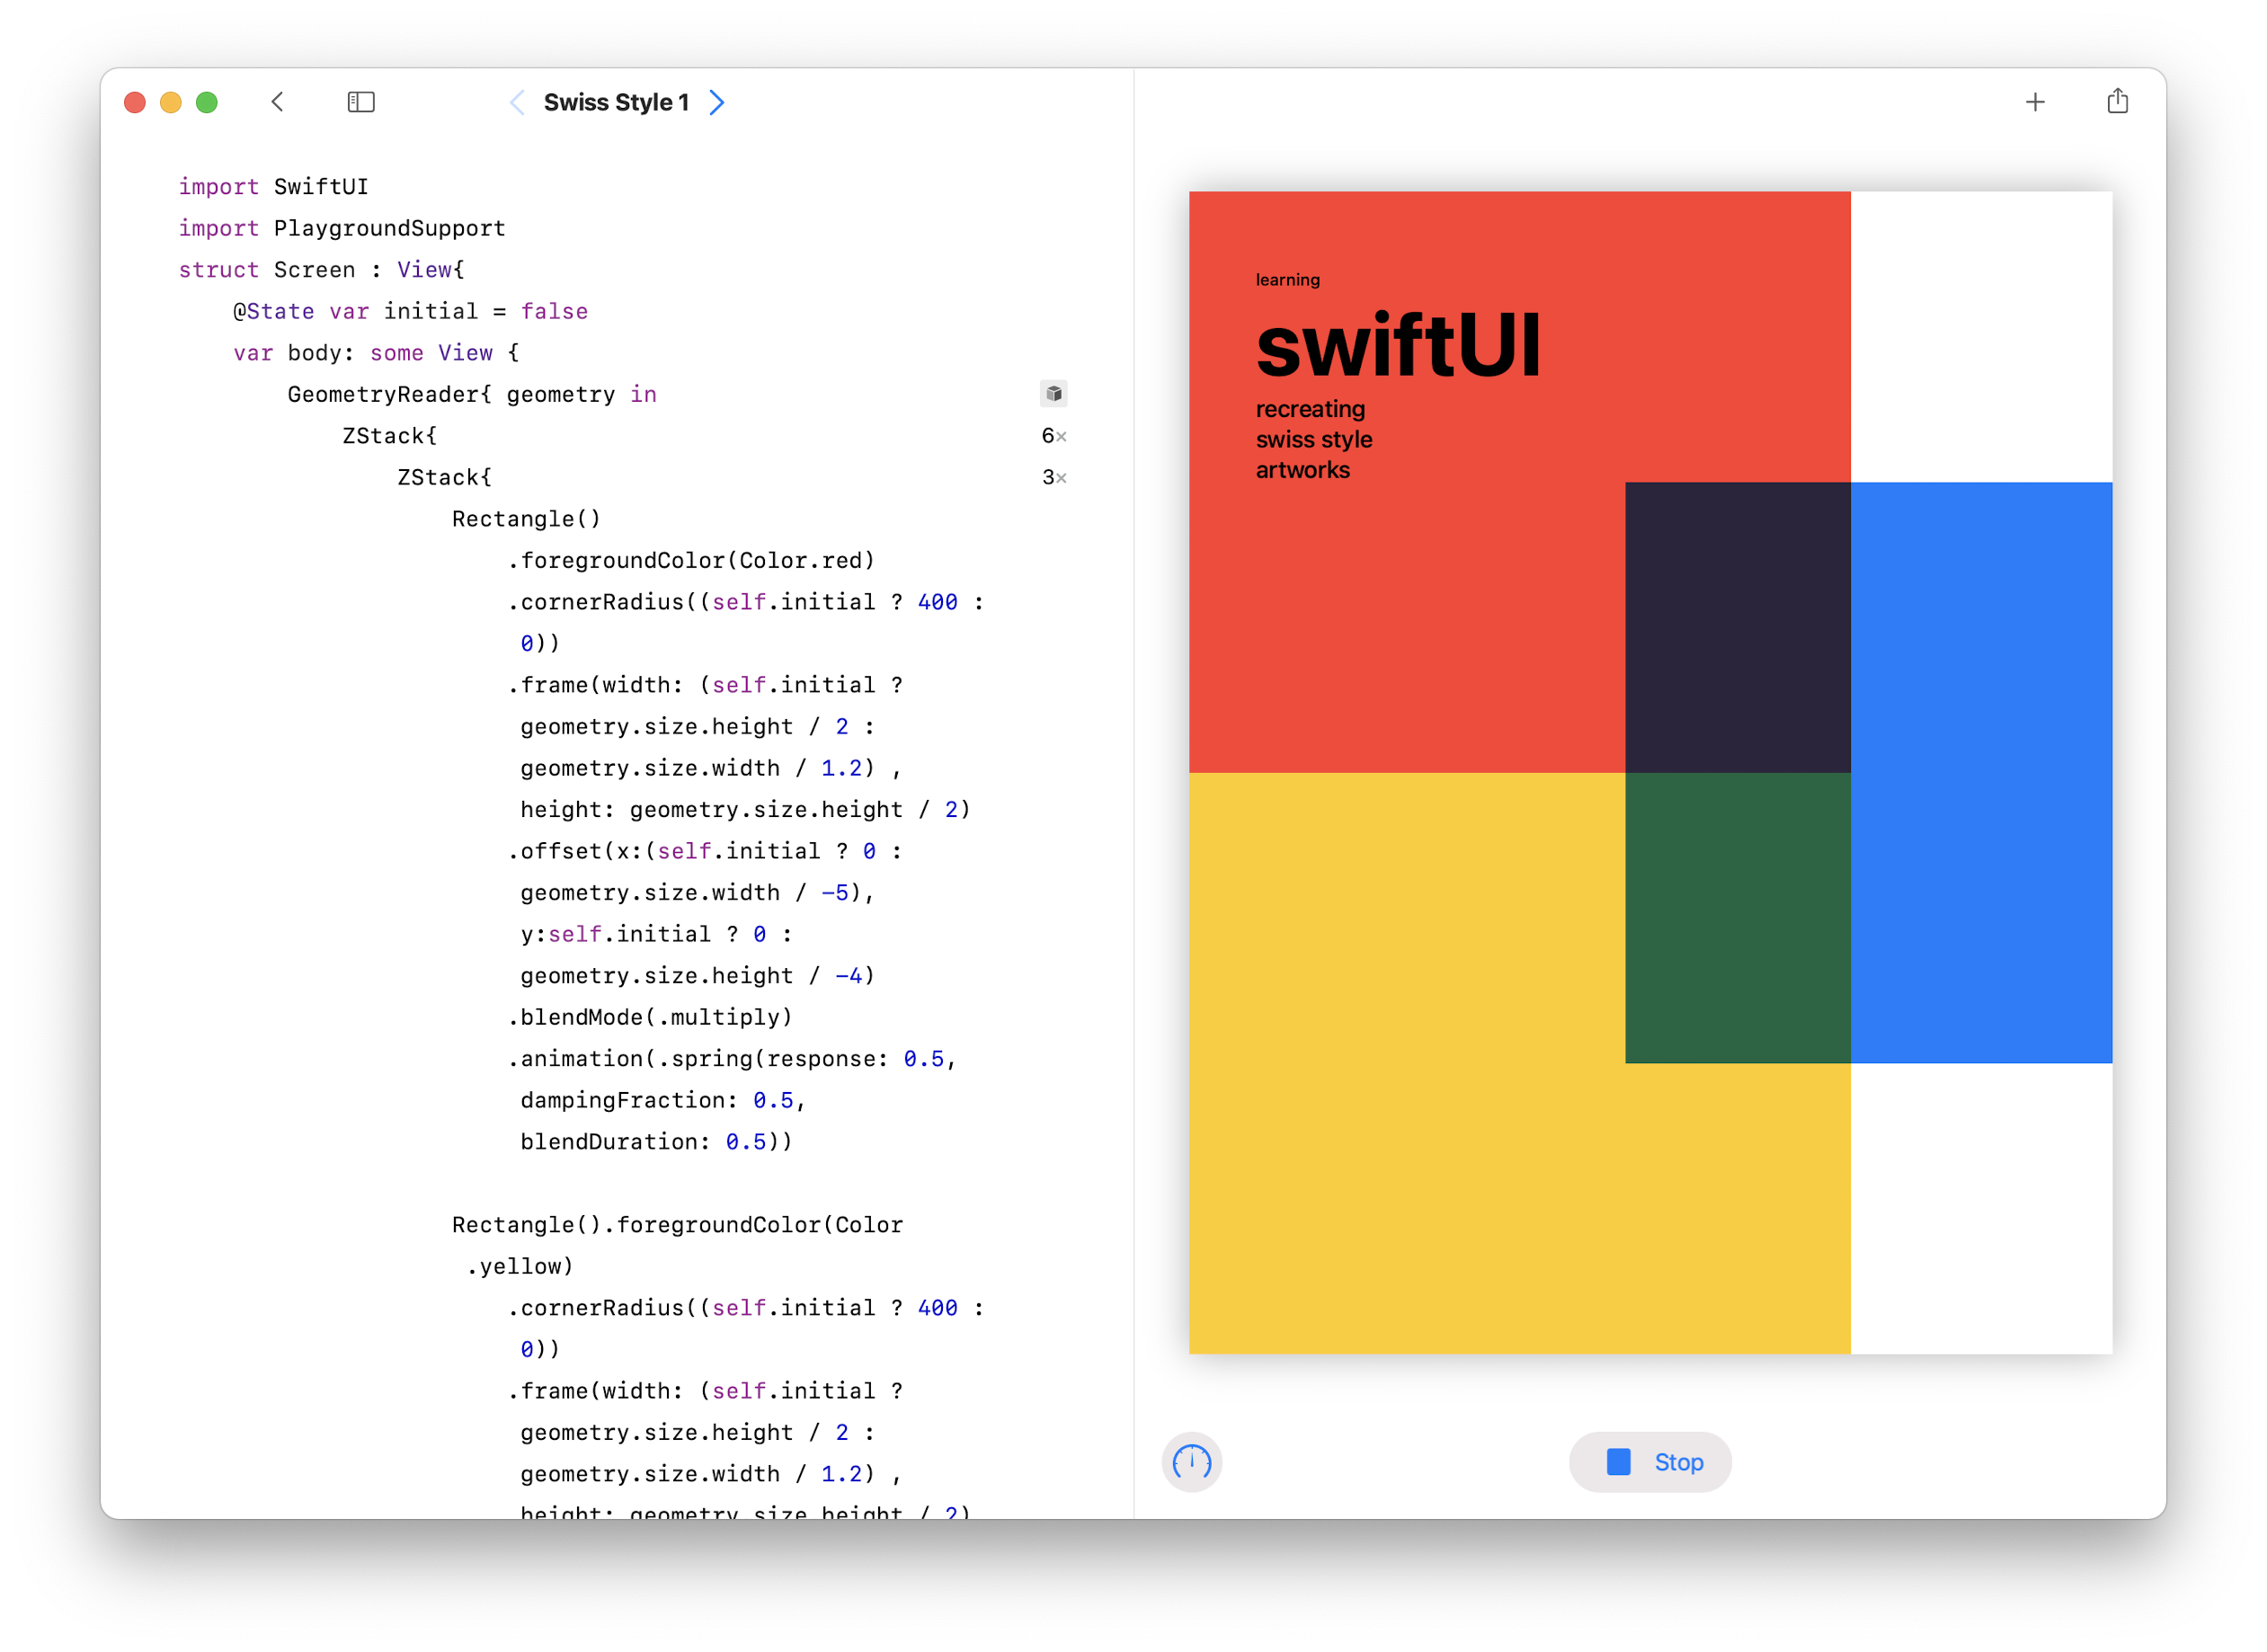 Swiss Style with SwiftUI